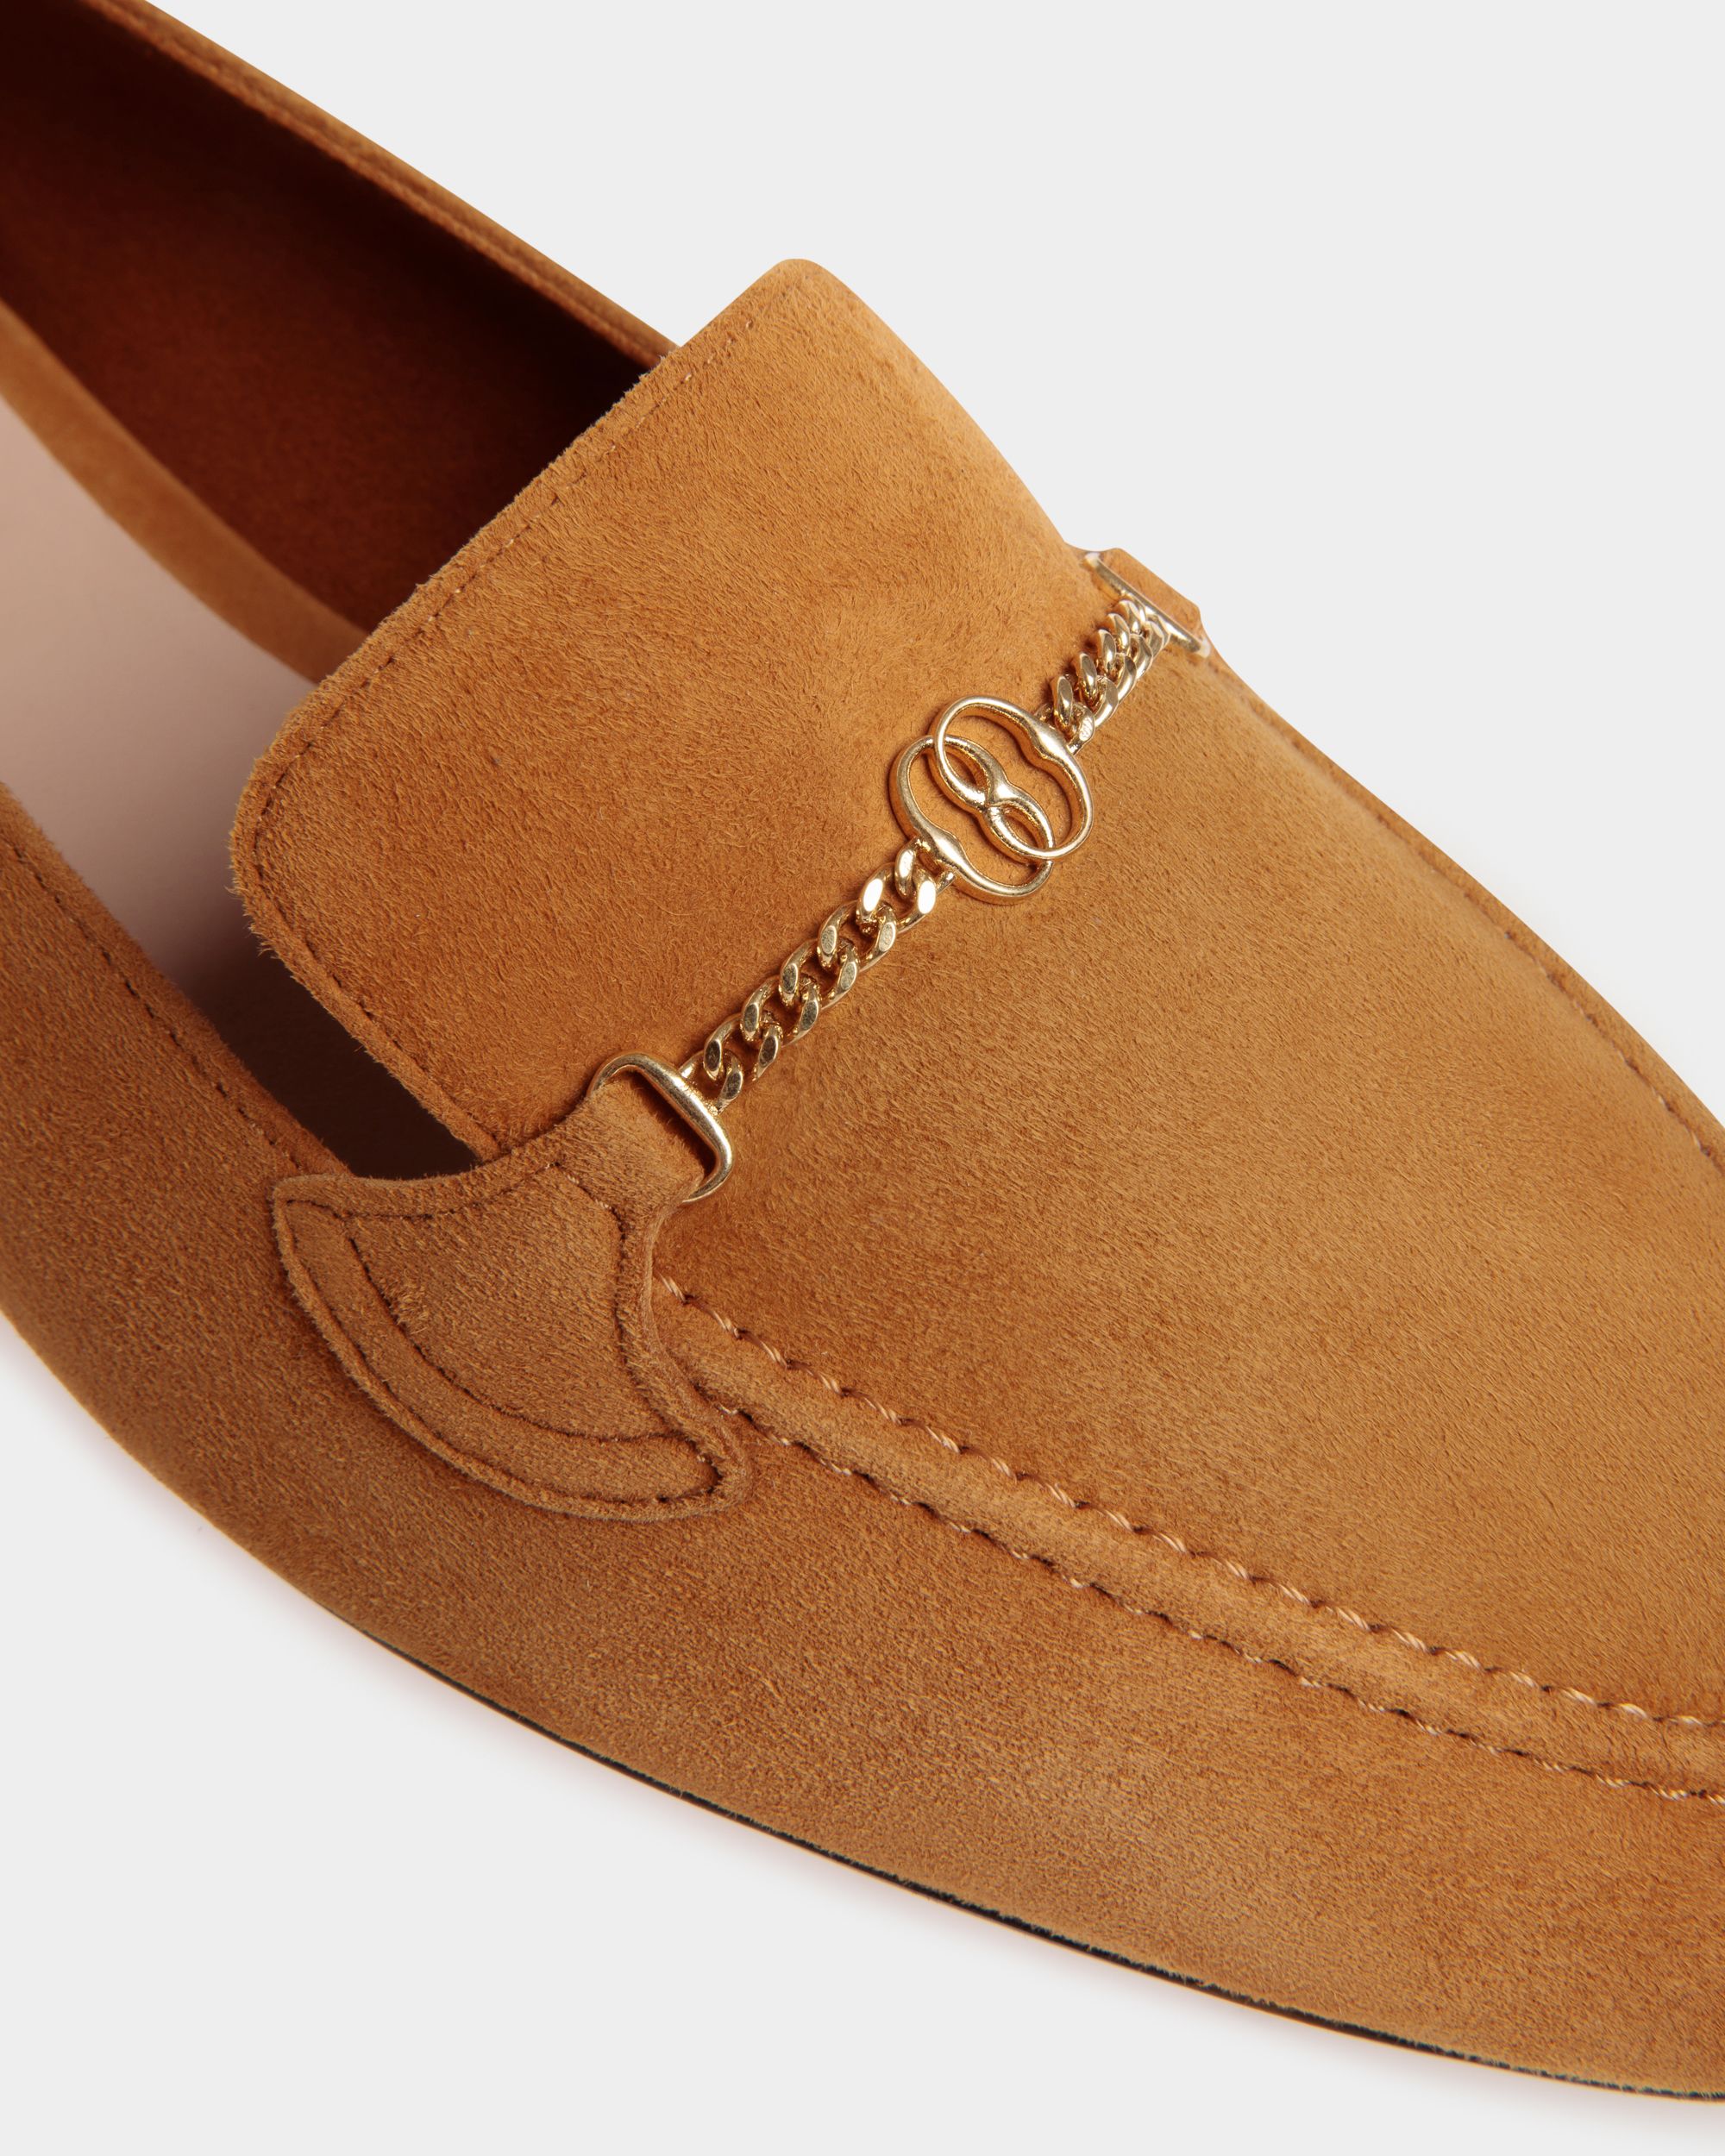 Daily Emblem | Women's Loafer in Brown Suede | Bally | Still Life Detail